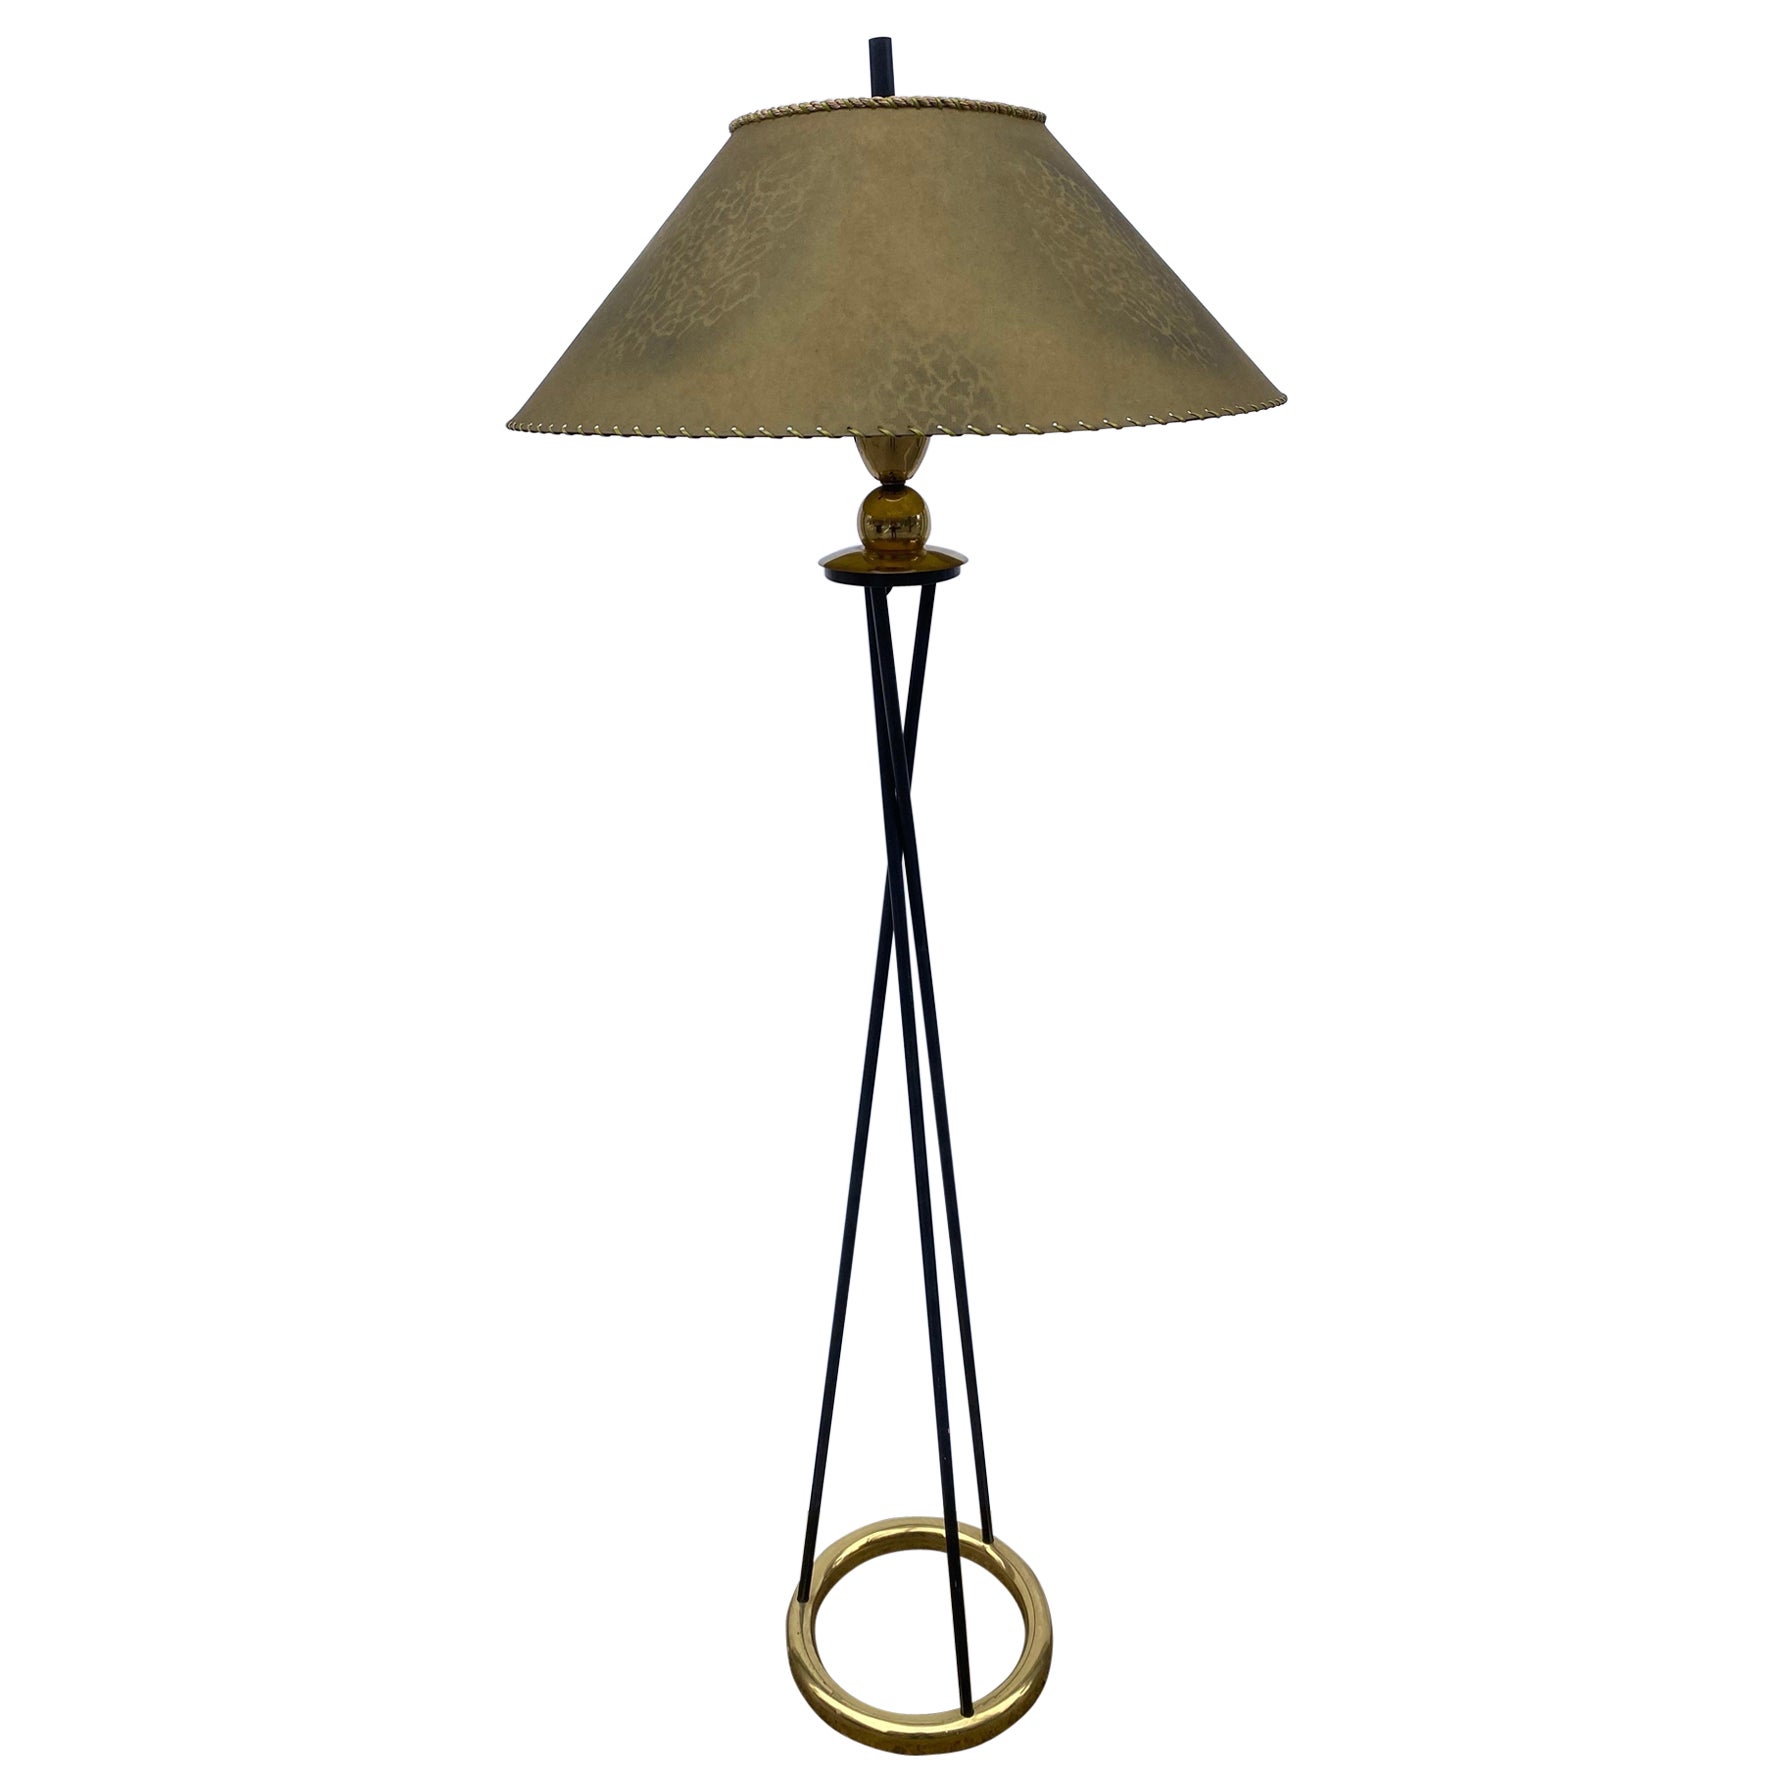 Gerald Thurston Style Tripod Floor Lamp with Brass Ring